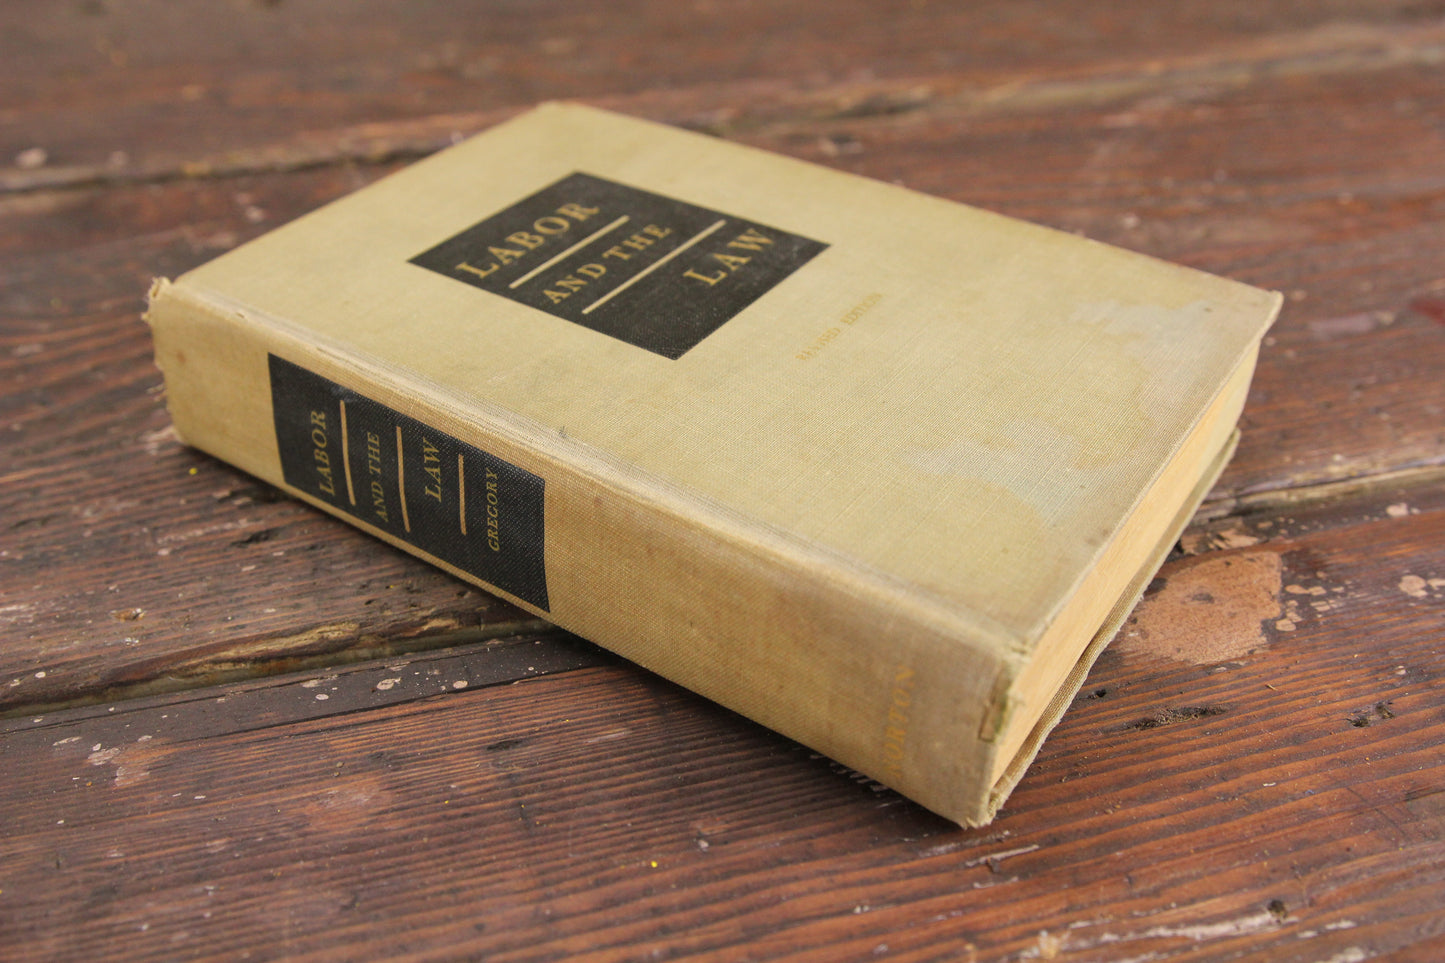 Labor and the Law by Charles O. Gregory, Copyright 1946